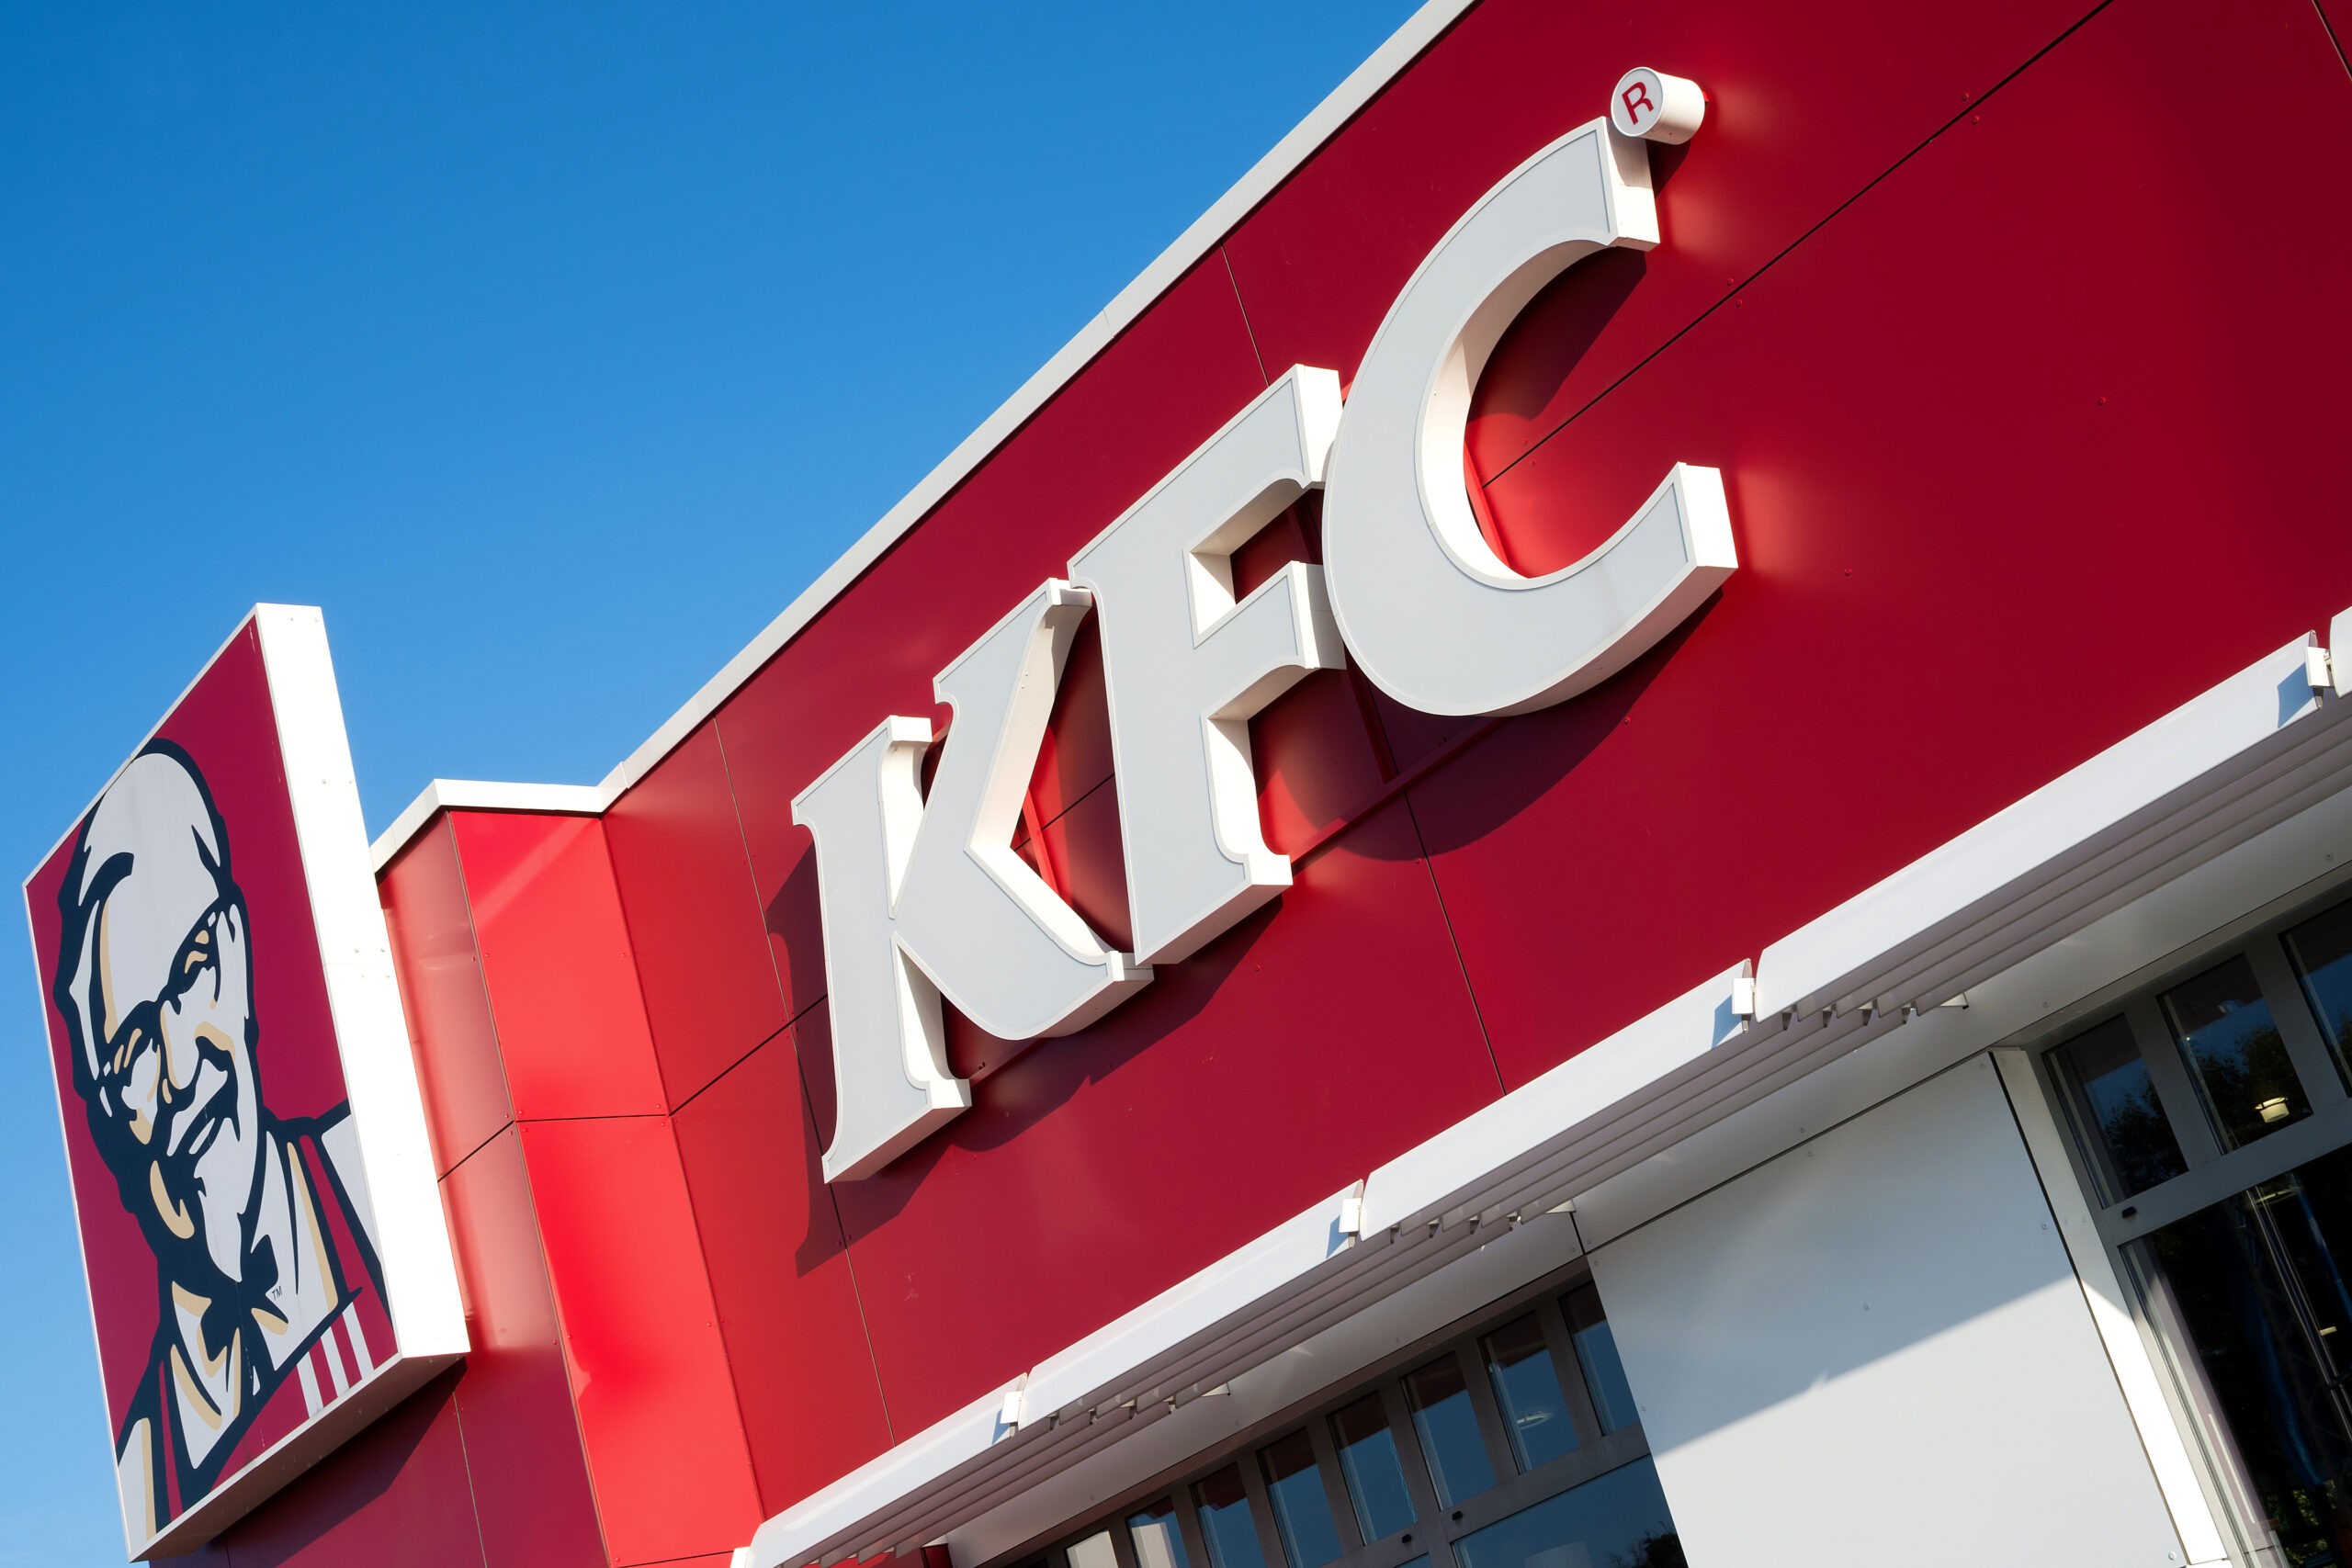 a picture of a KFC restaurant sign taken from the outside of the establishment.